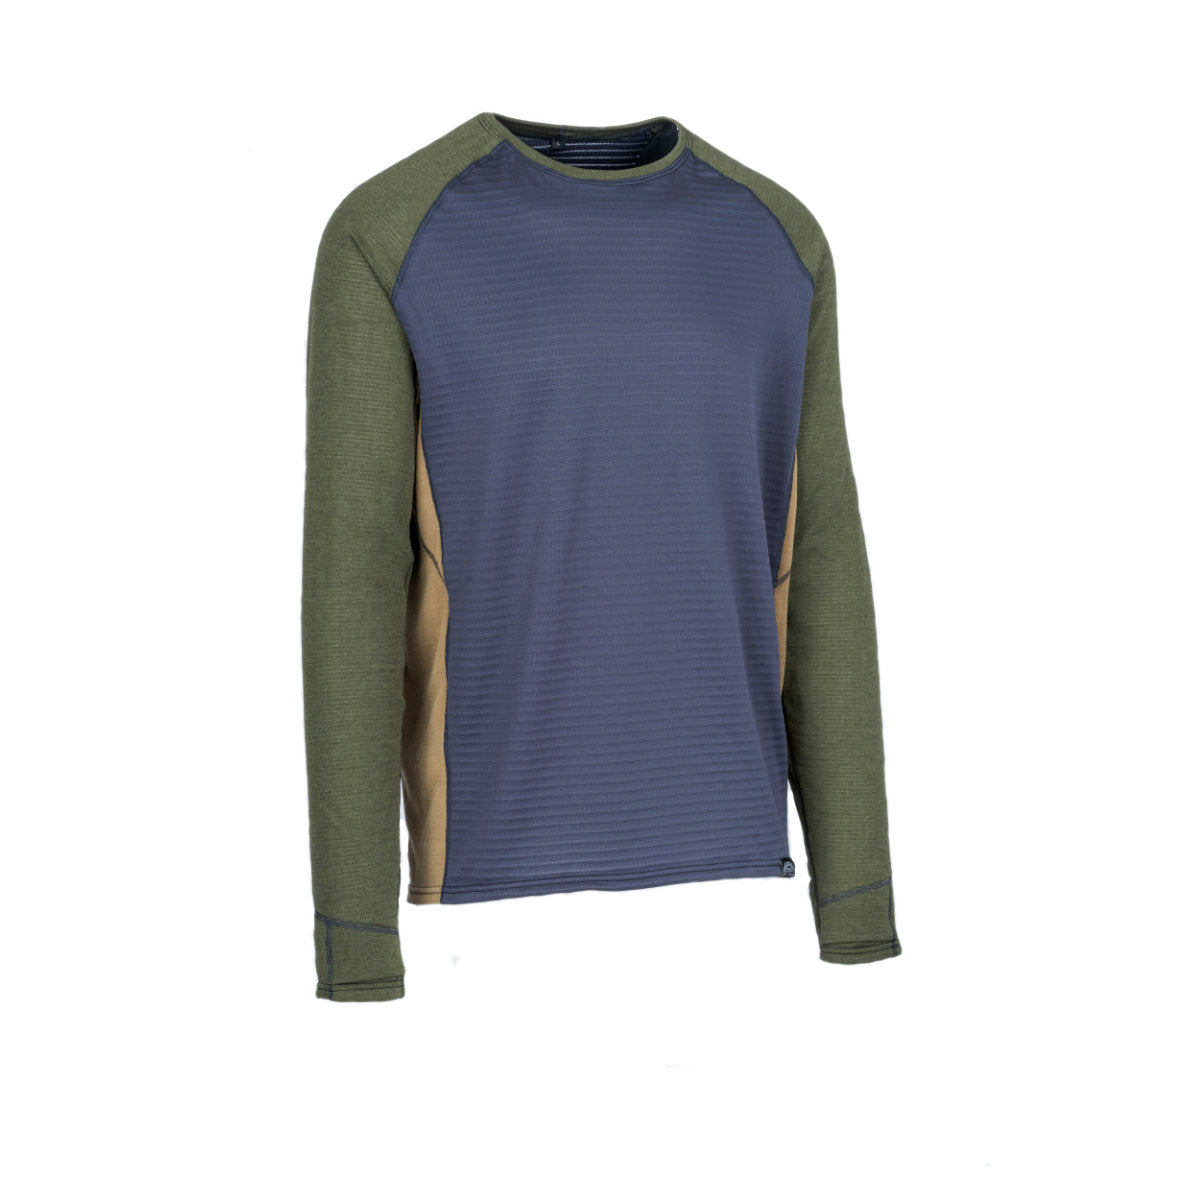 Polartec® Immersion Research | Research Immersion Crewneck – Baseline Shirt